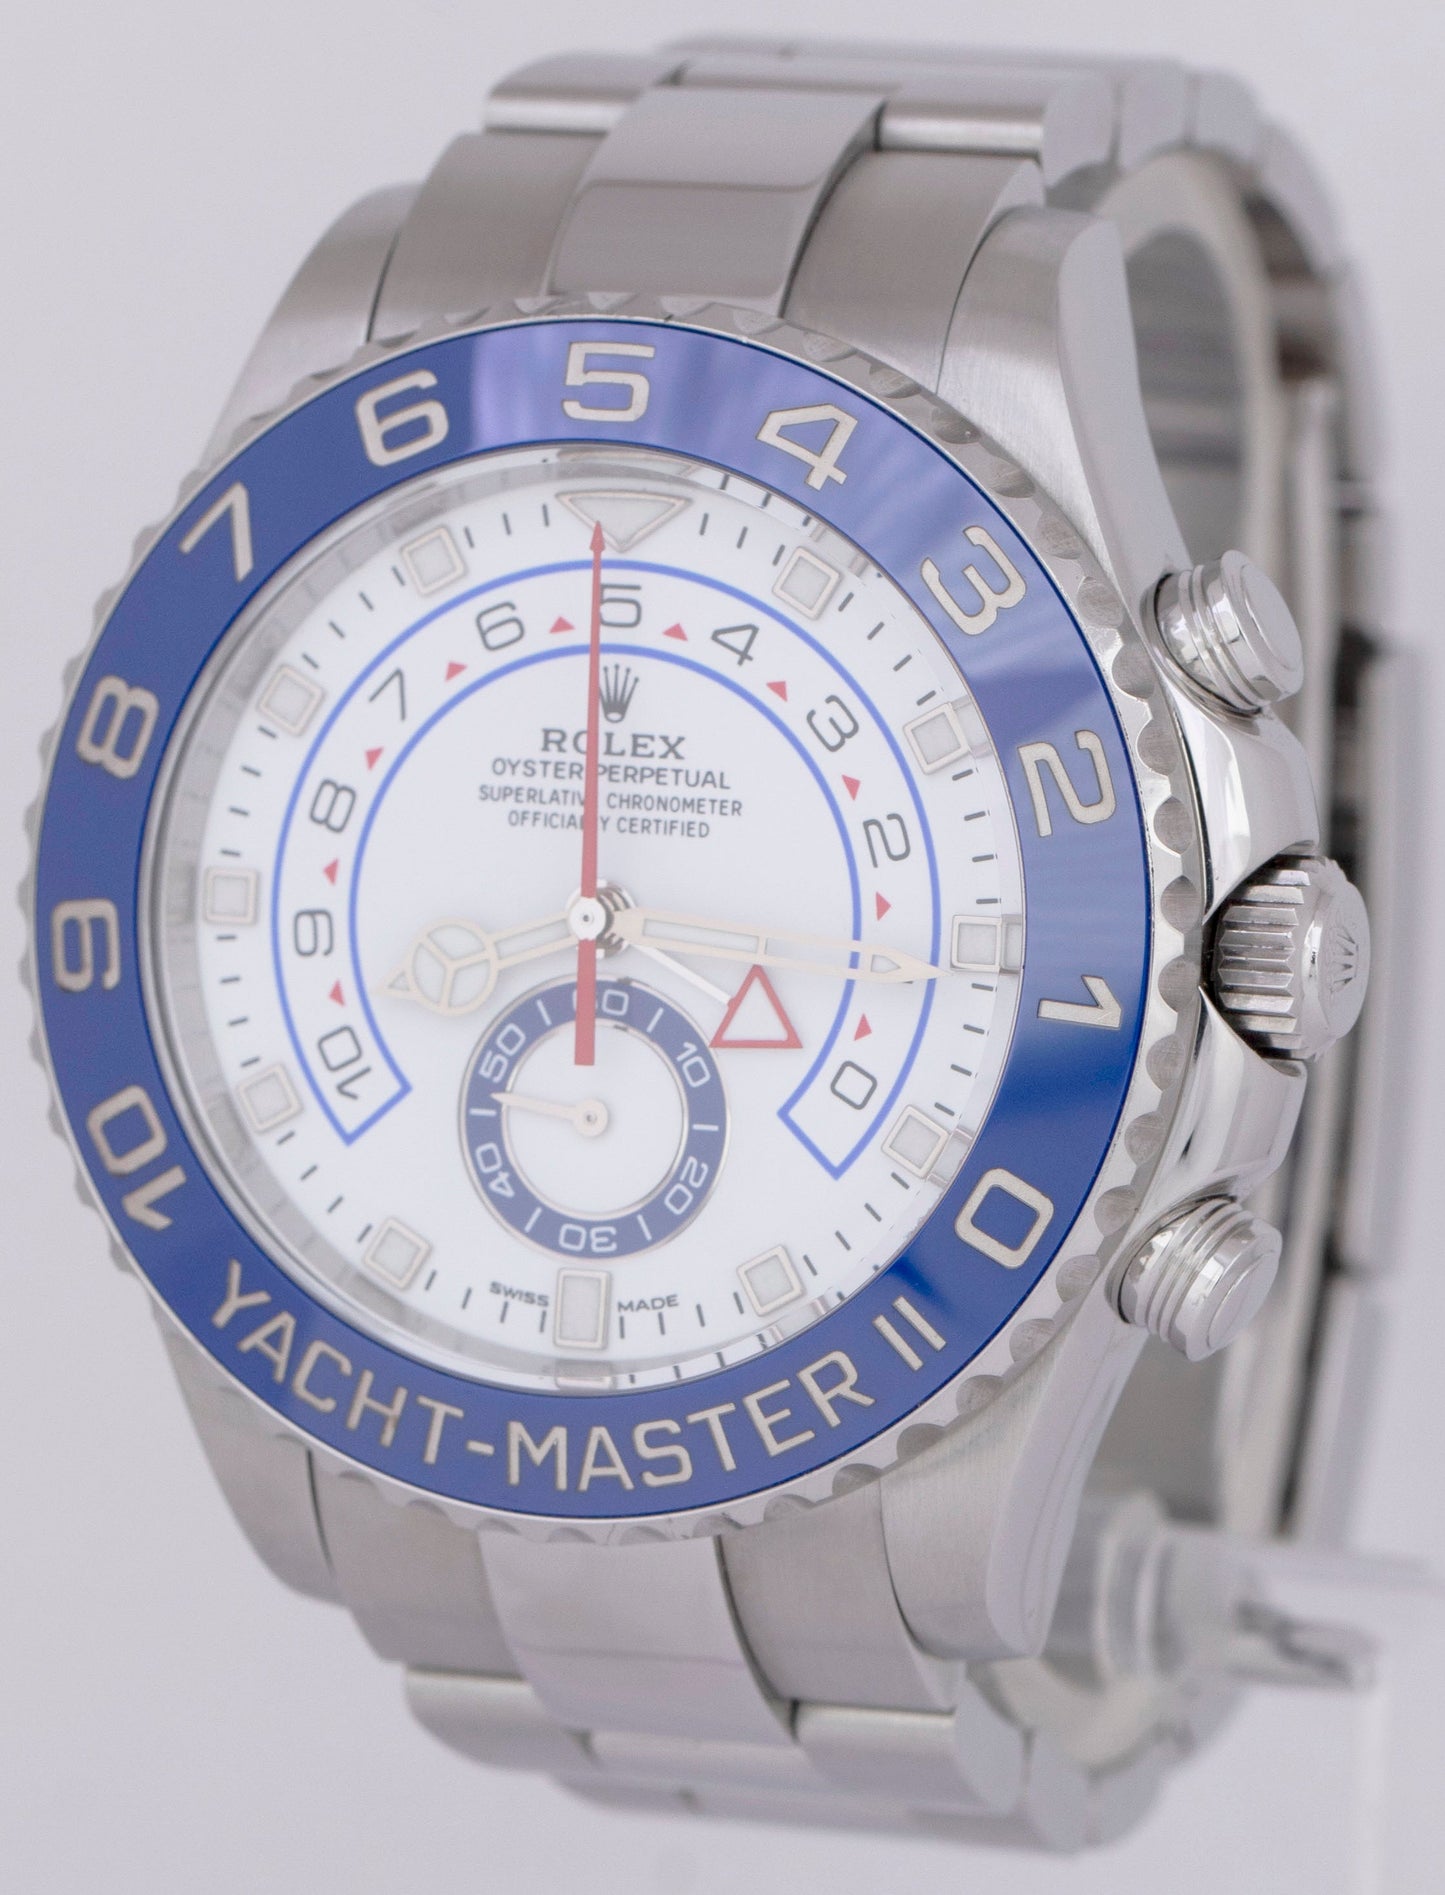 NEW PAPERS 2021 Rolex Yacht-Master II 44mm Stainless White 116680 Watch B+P